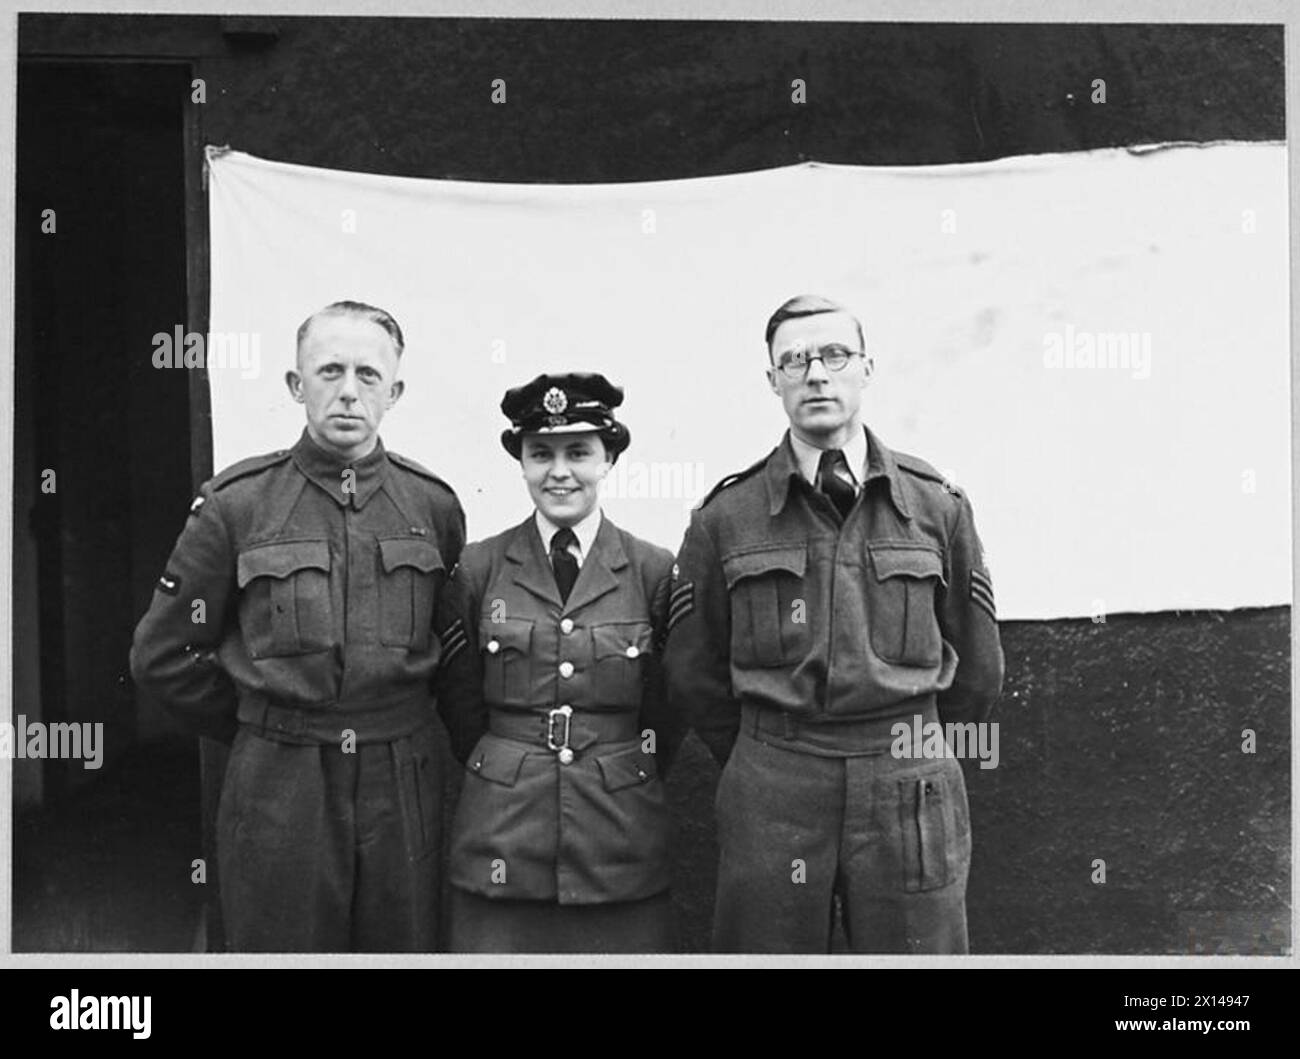 AIR CHIEFS STAFF - 20th December 1945 - - Left to right - Sergeant Kay Staughton, W.A.A.F., and Flight Sergeant Cyril Jolly Royal Air Force Stock Photo